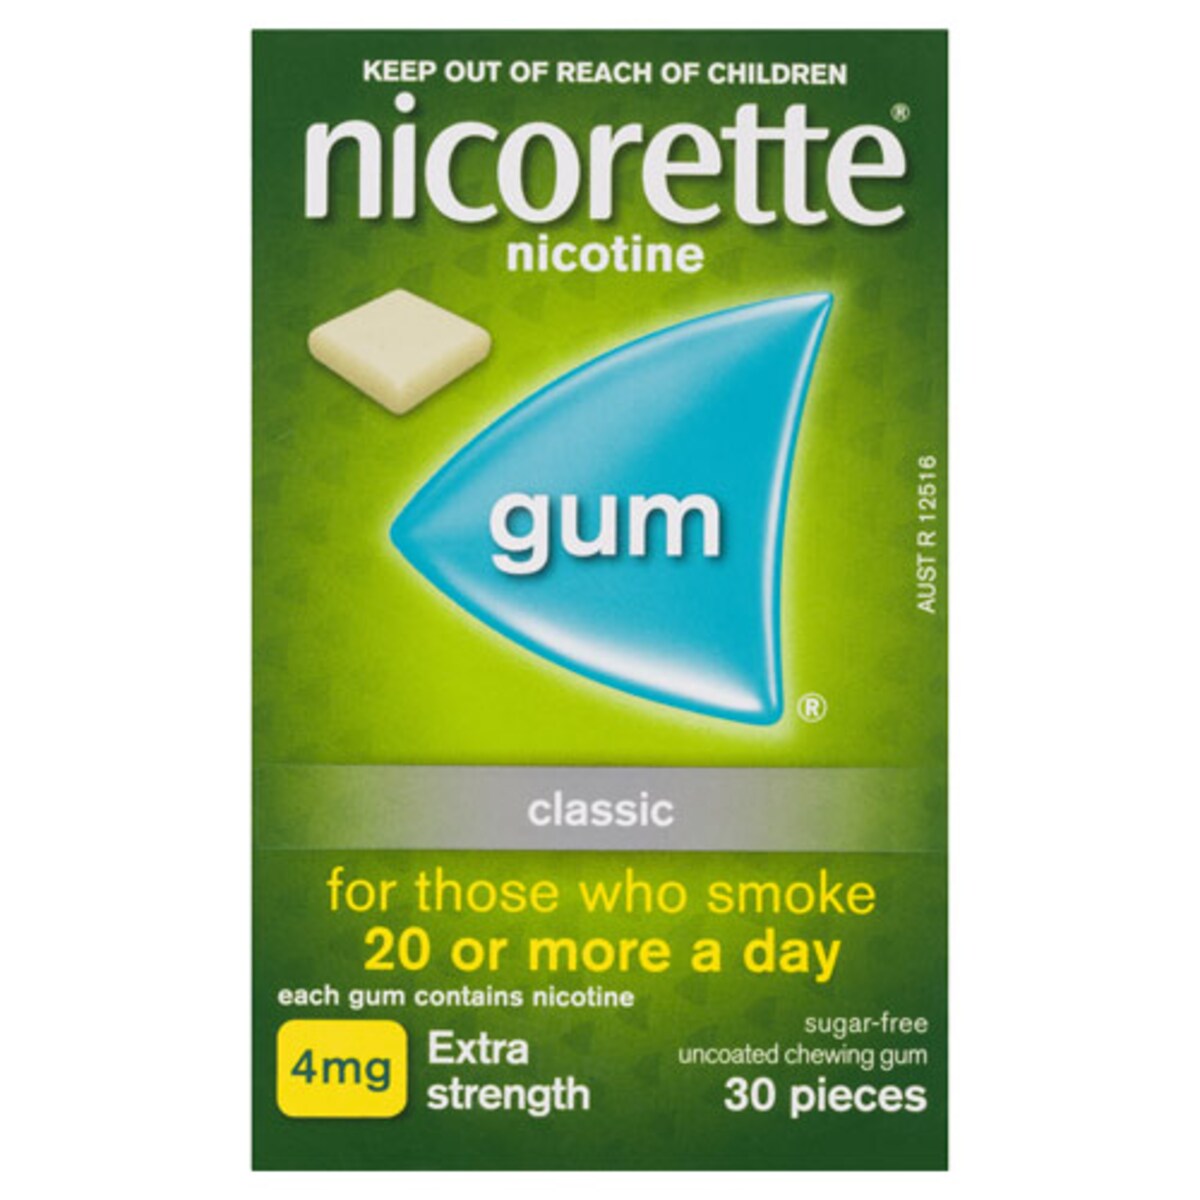 Nicorette Quit Smoking Gum 4mg Extra Strength Uncoated Classic 30 Pieces